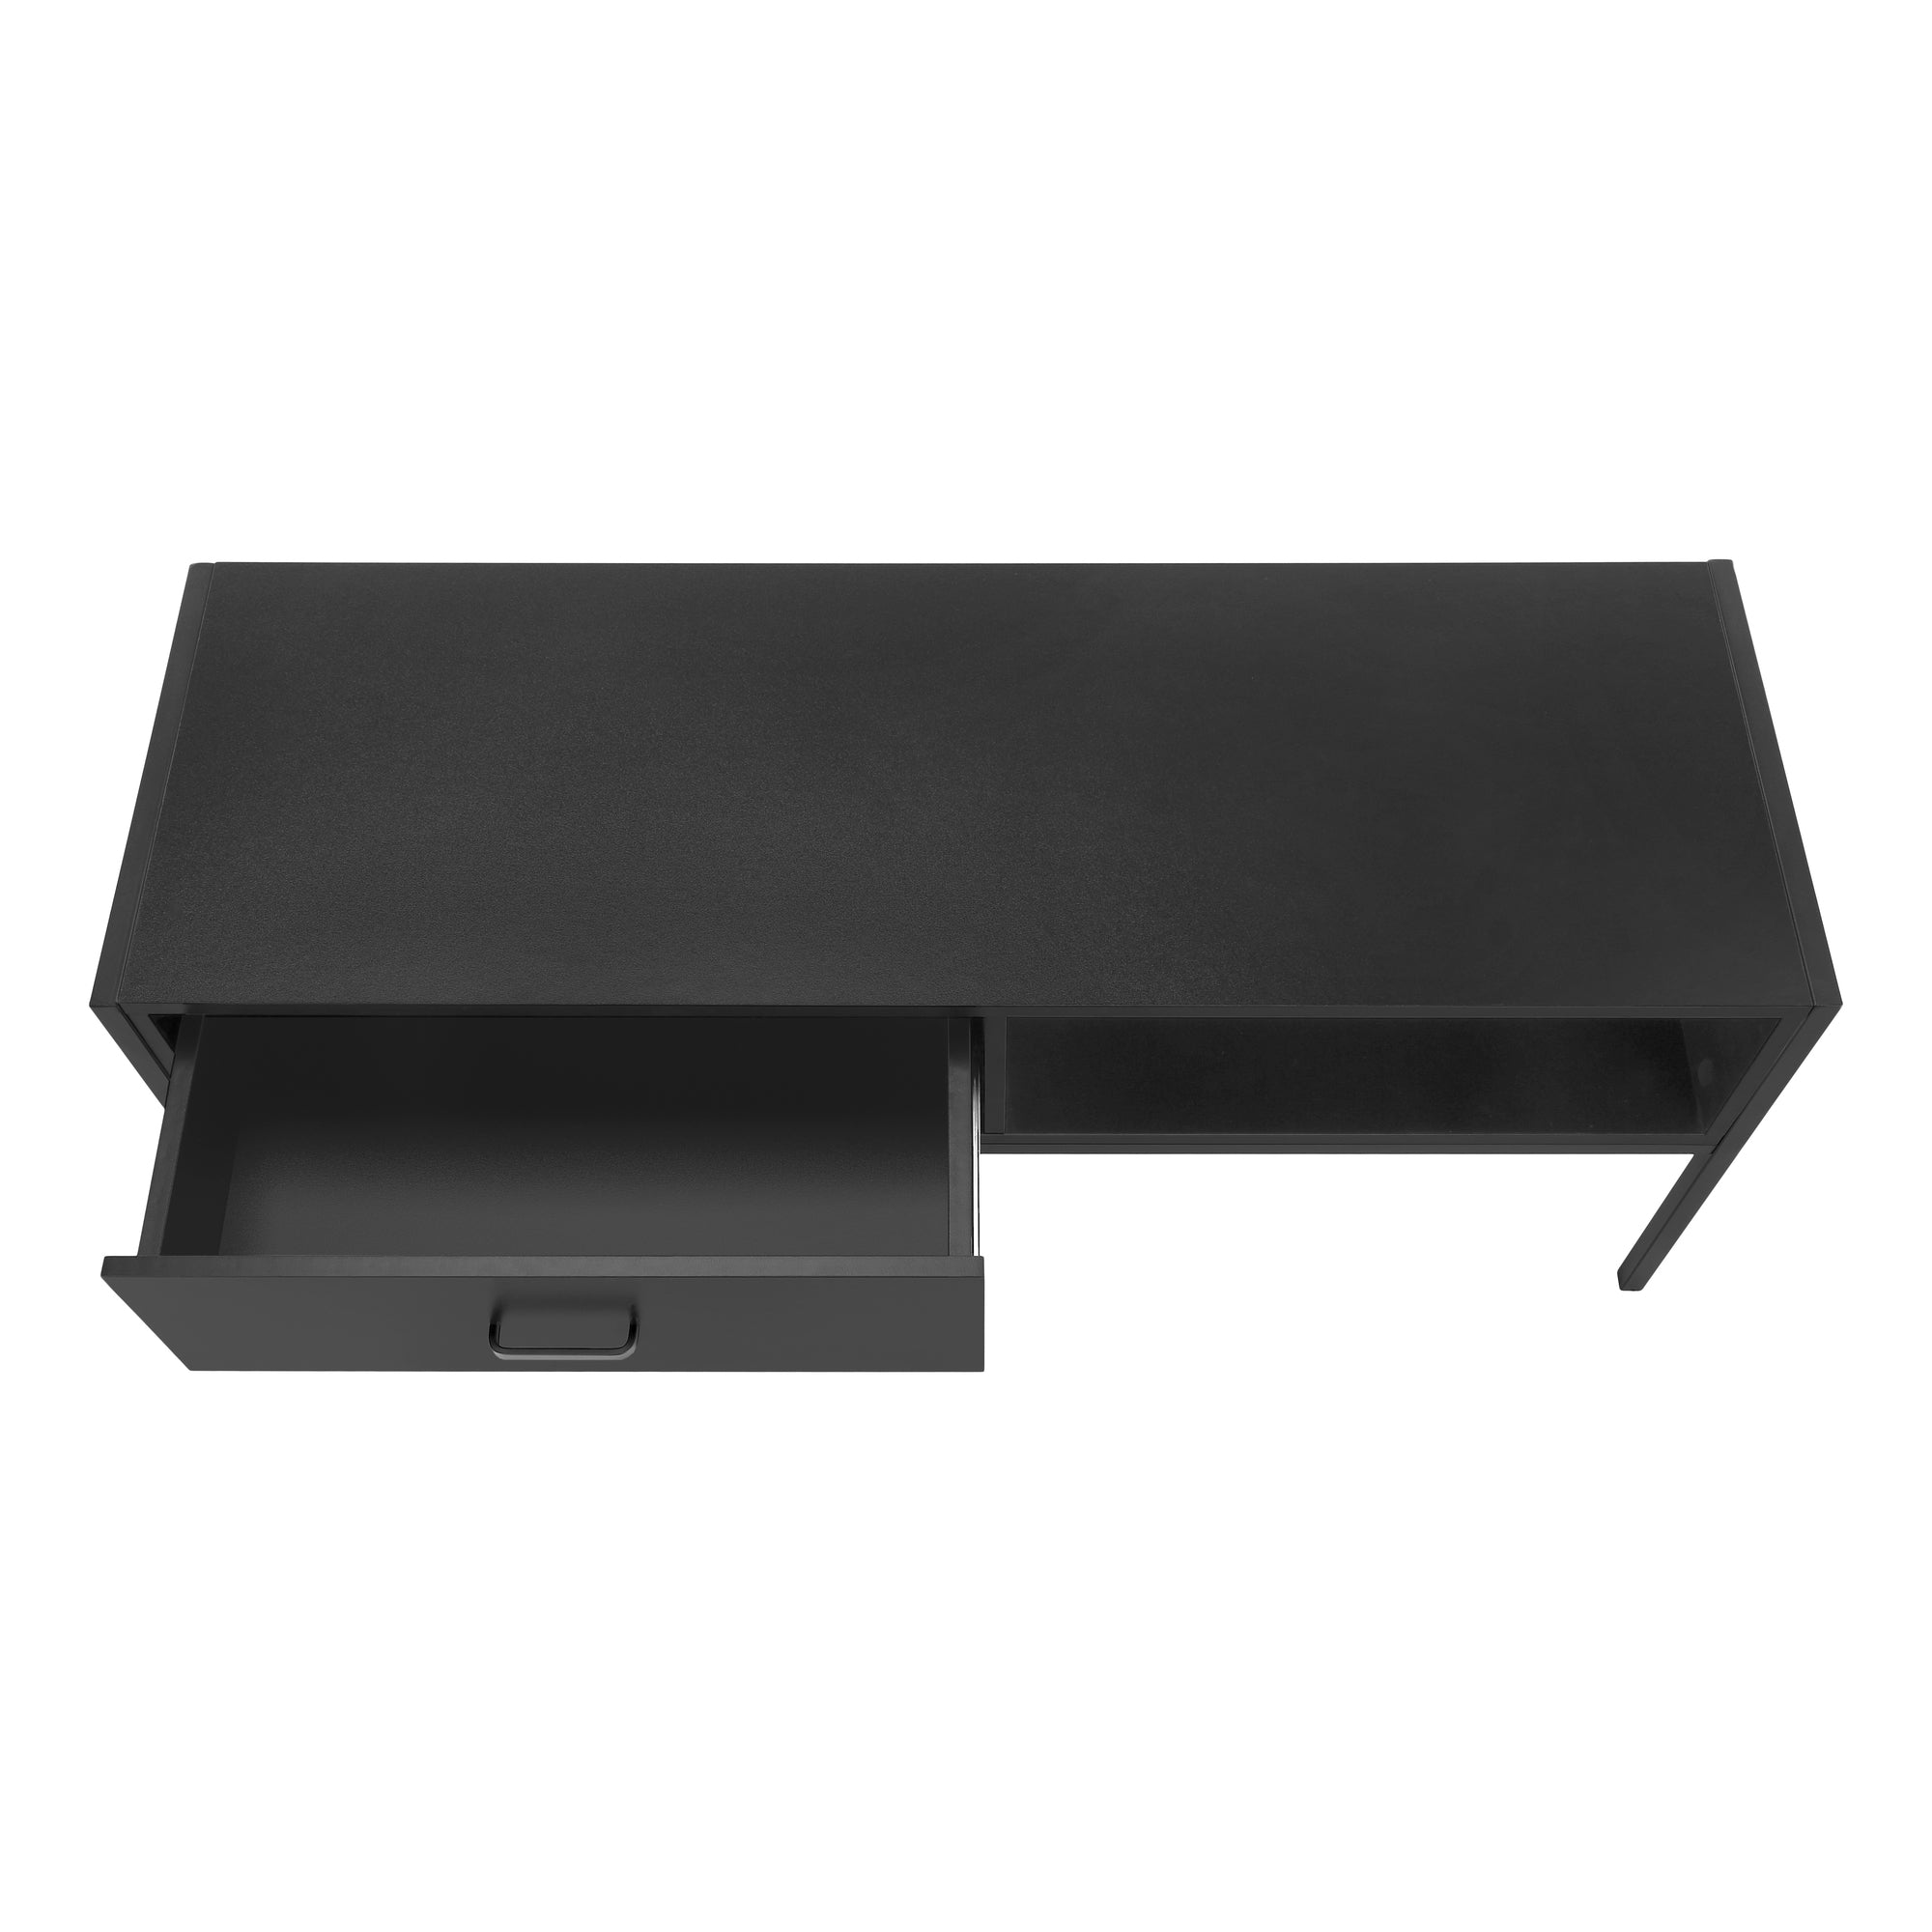 MN-702874    Tv Stand, 48 Inch, Console, Media Entertainment Center, Storage Cabinet, Living Room, Bedroom, Laminate, Metal, Black, Contemporary, Modern